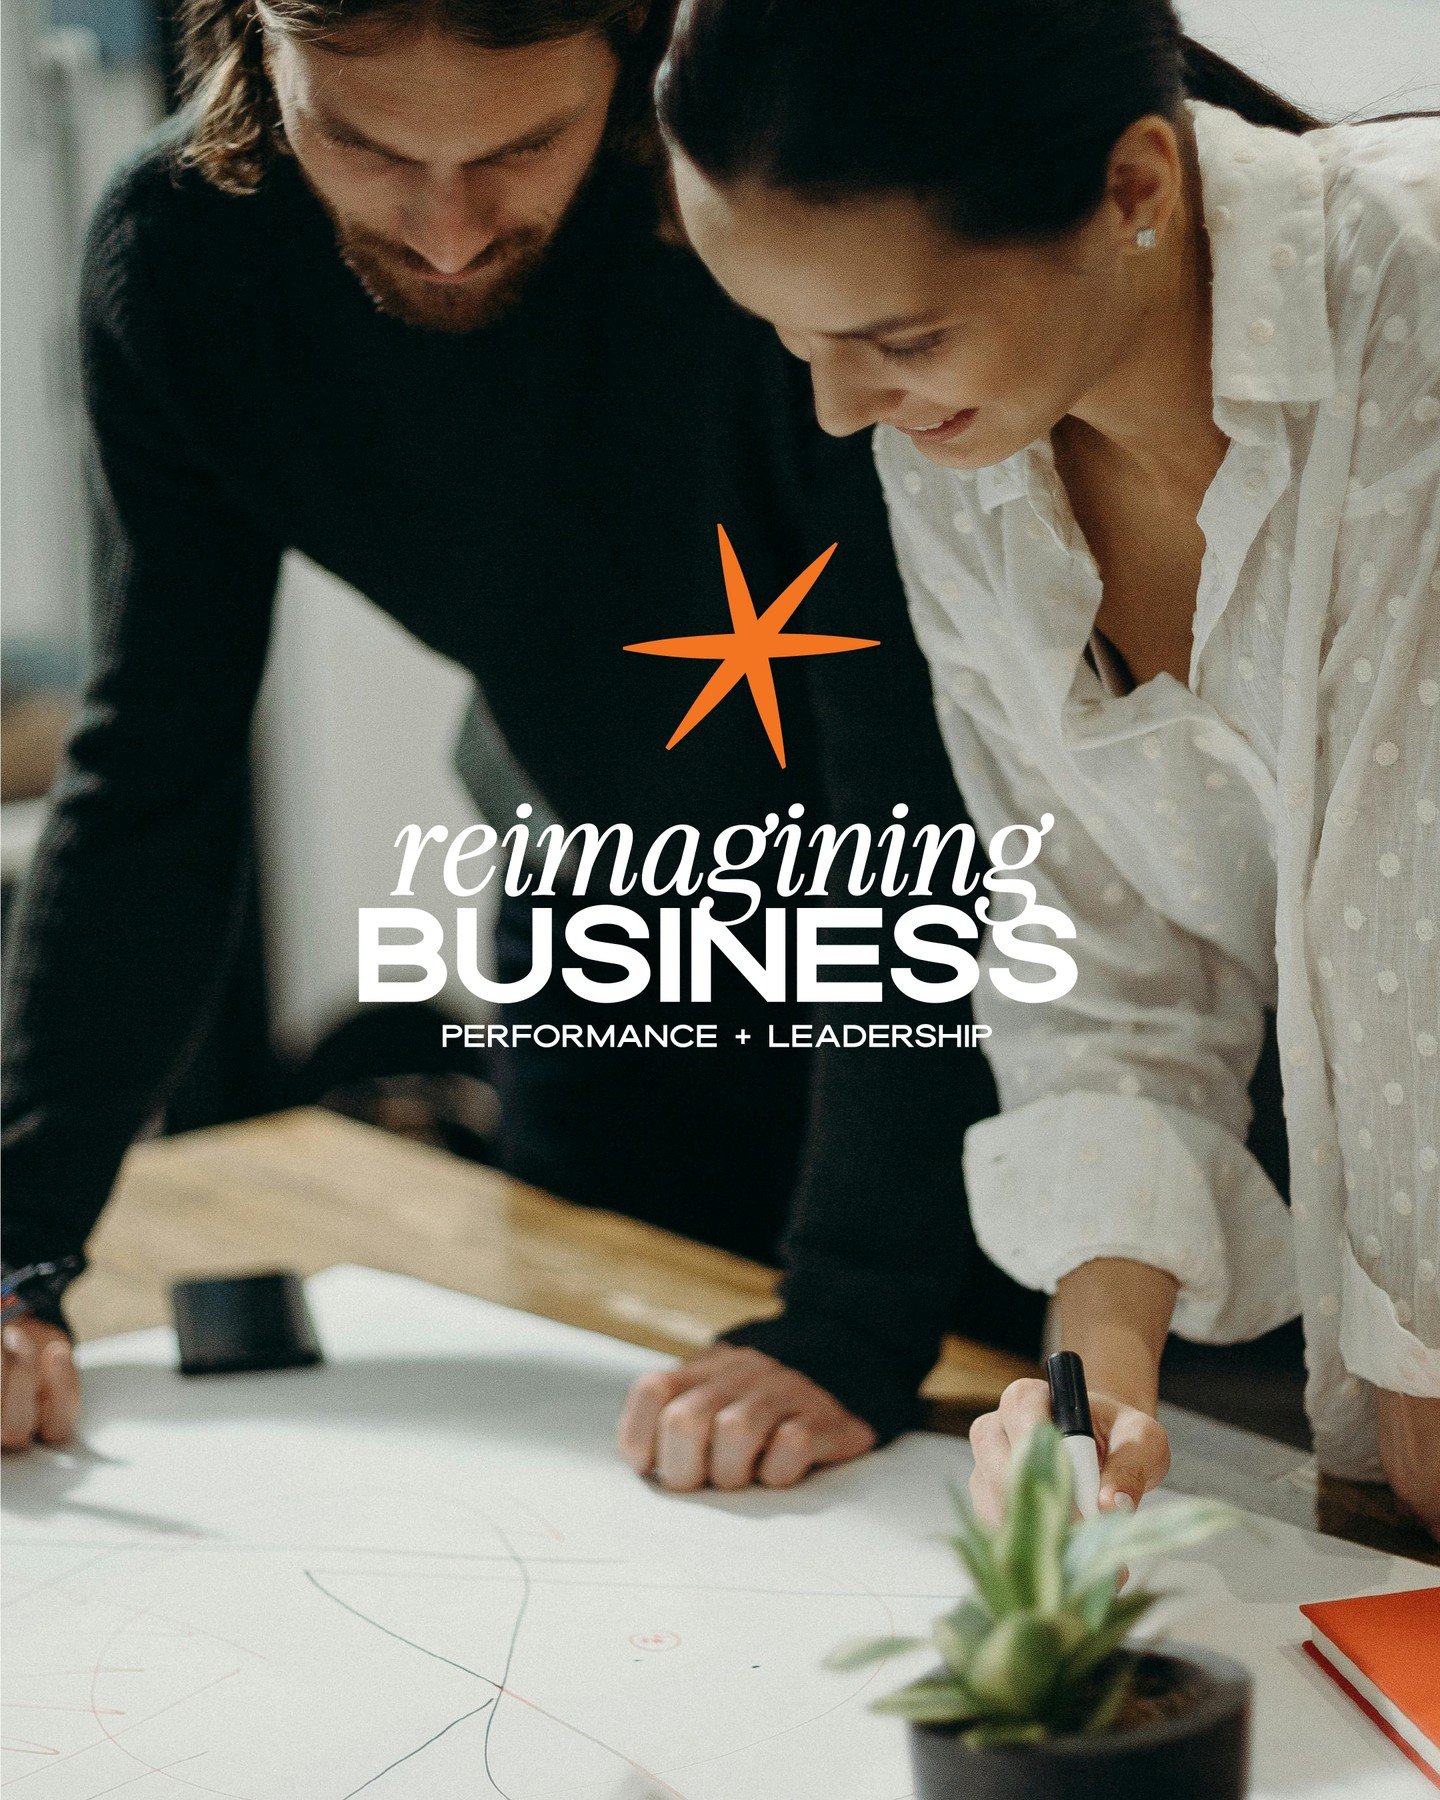 Reimagining Business 🎉 @riaza.manricks is all about empowering leaders and teams to overcome plateaus, transform culture and drive complete business growth 📈✨ Reimagining what&rsquo;s possible from Melbourne, Australia.

#leadership #businessgrowth